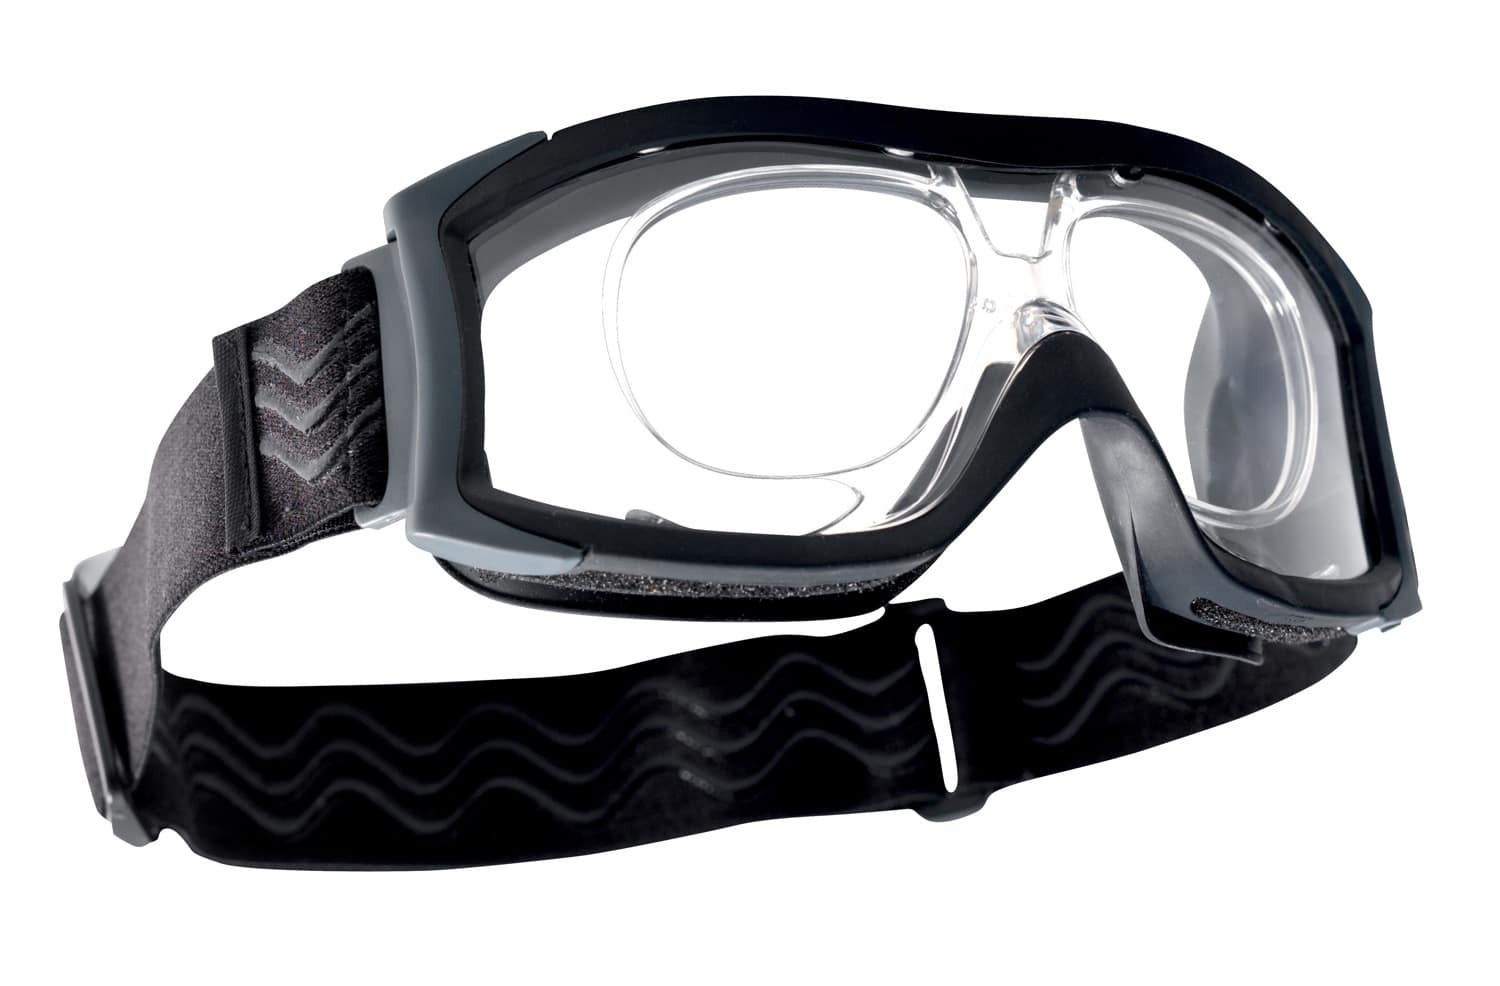 Bolle goggles are compatible with corrective lenses as shown here. This is an important feature for anyone on a tactical team or in the military.